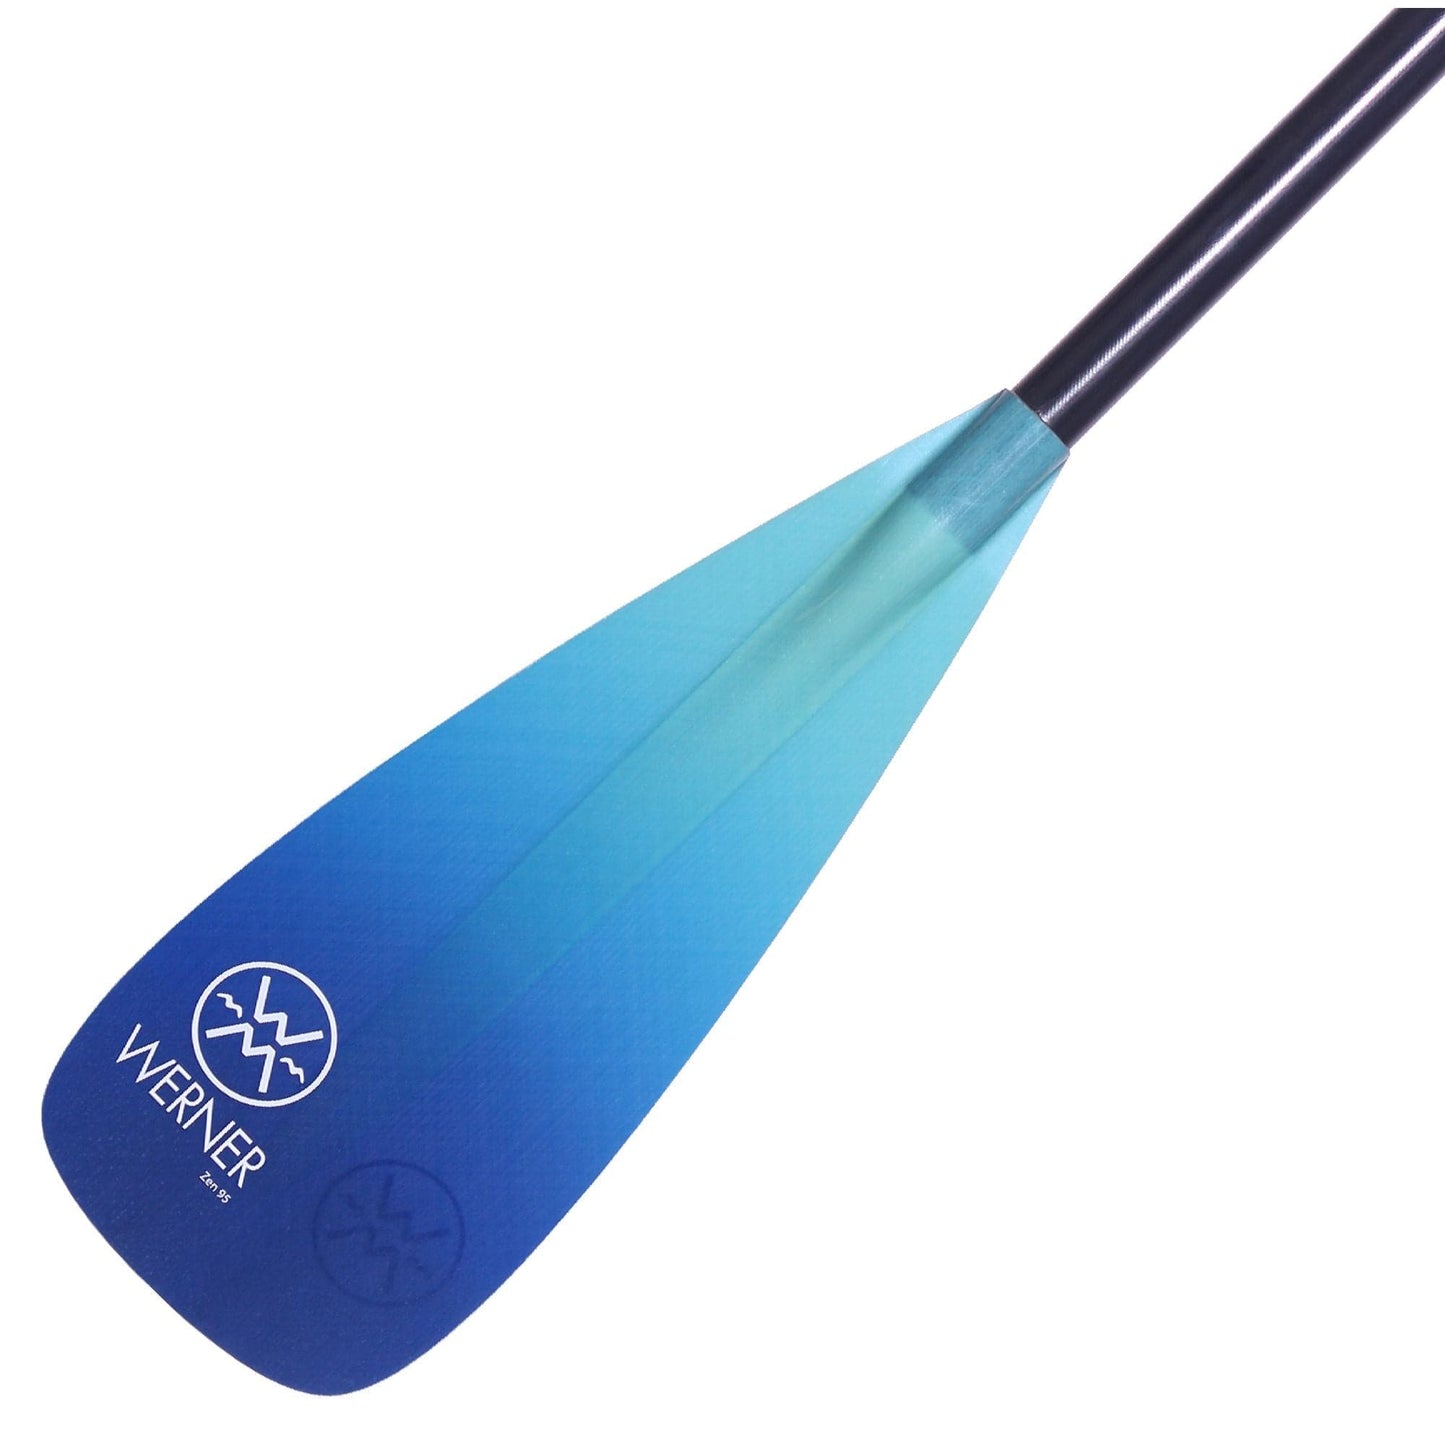 Featuring the Zen 95 - 1pc SUP Paddle 1-piece sup paddle manufactured by Werner shown here from a third angle.